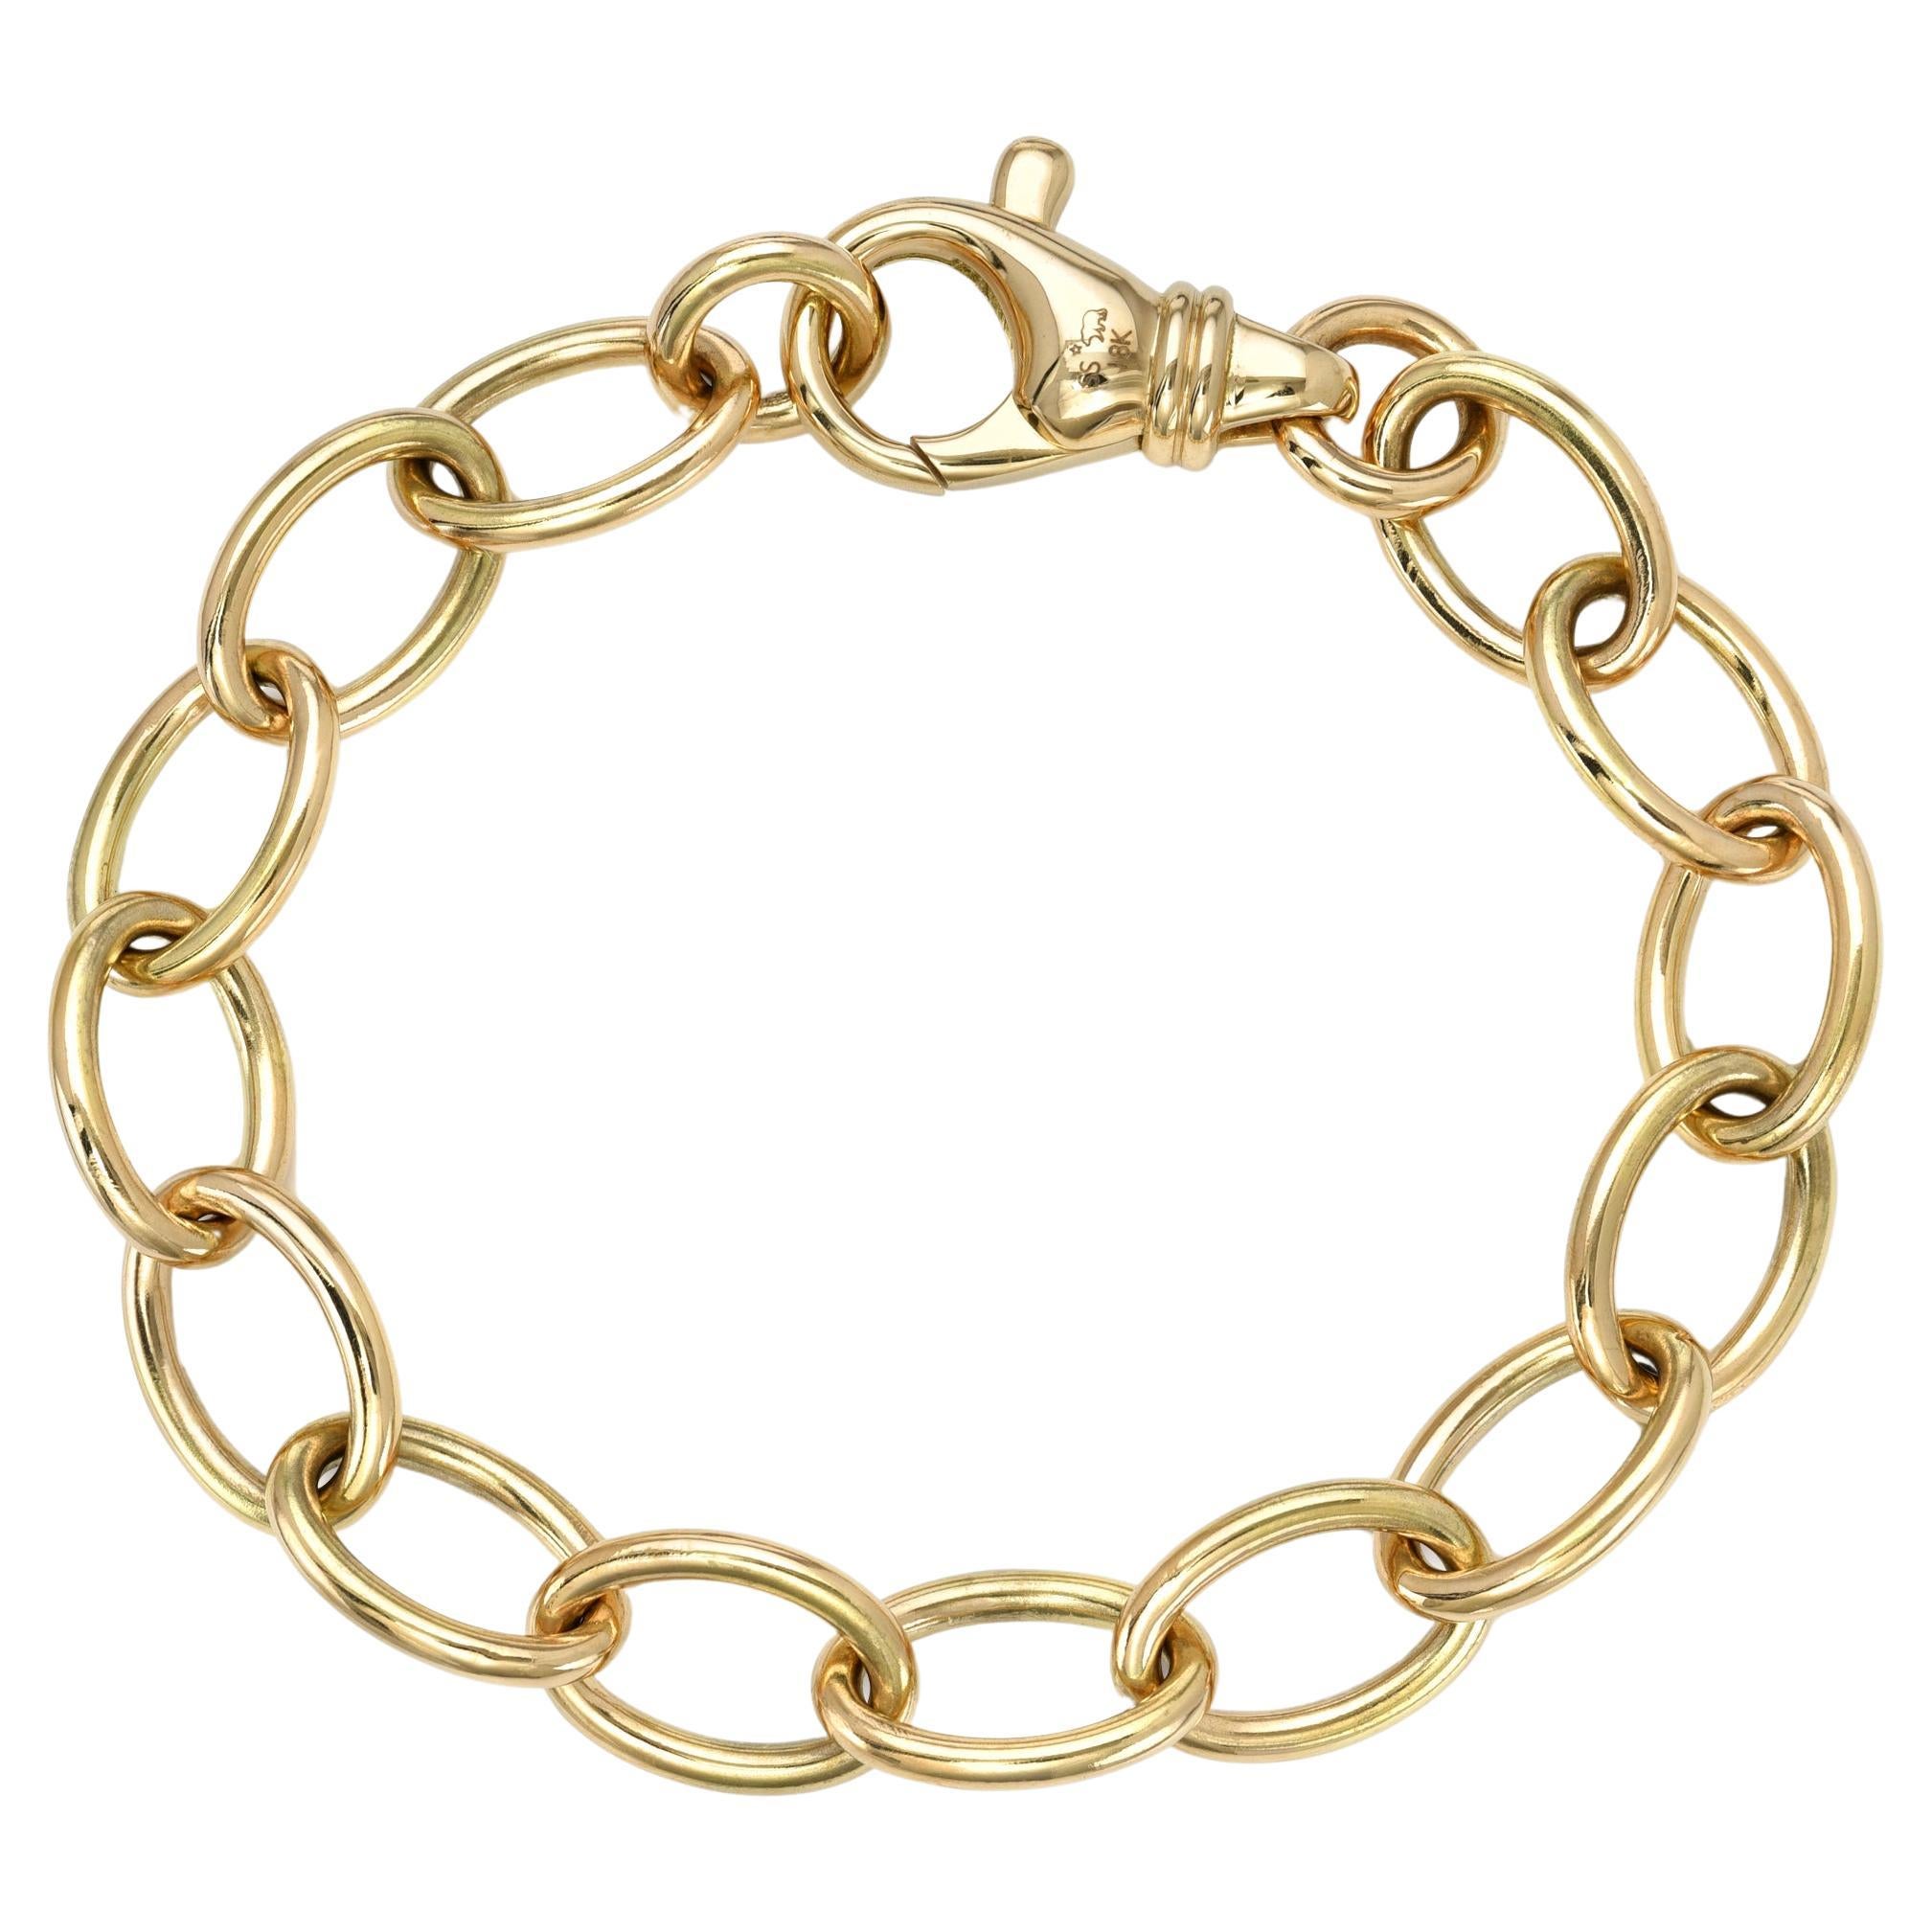 Handcrafted Sport Luxe Bracelet in 18K Yellow Gold by Single Stone For Sale